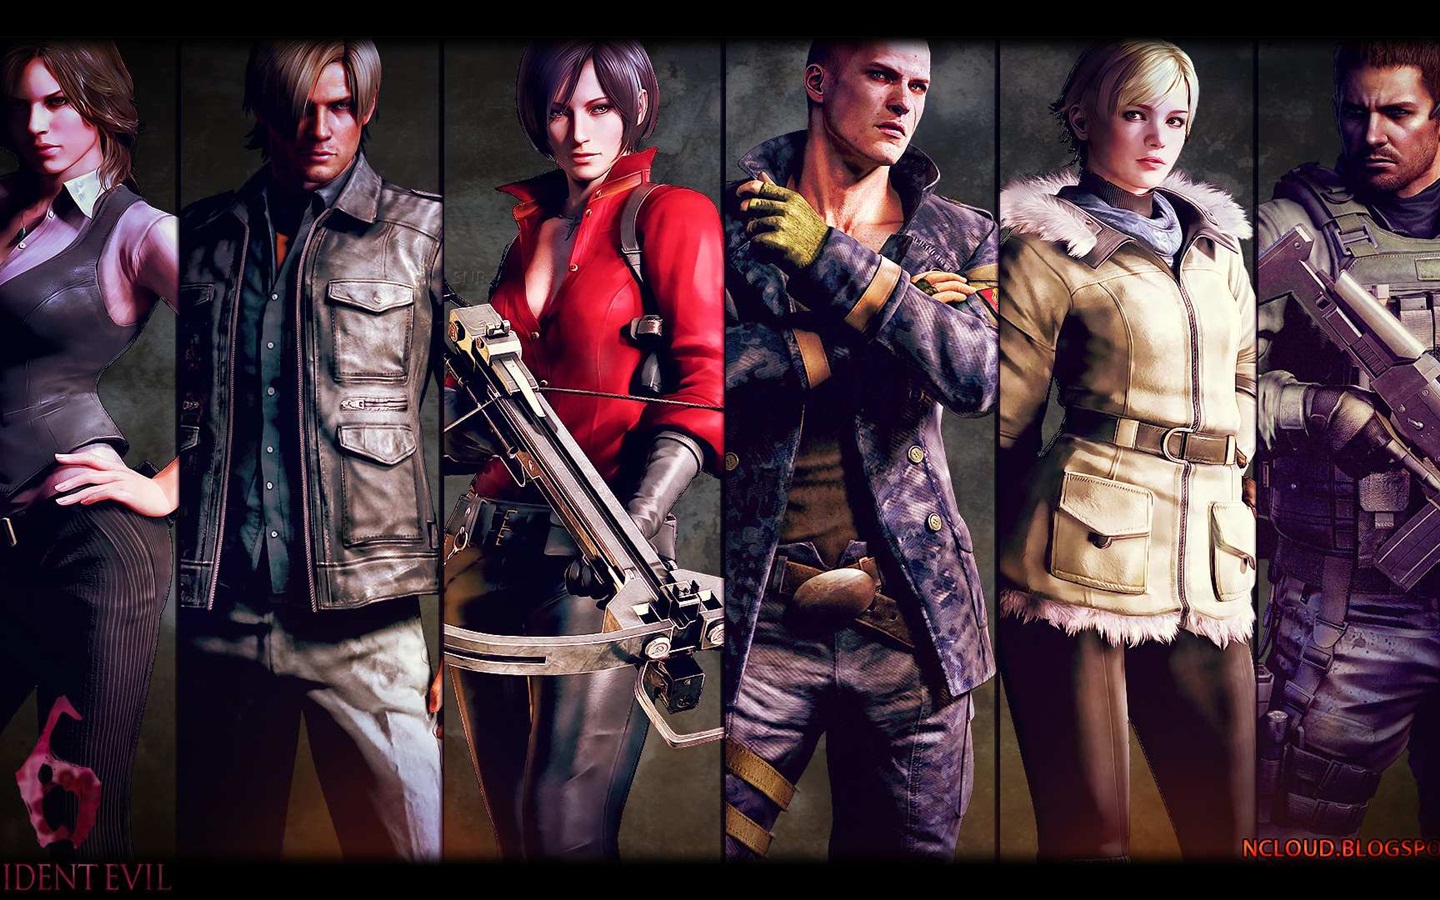 Resident Evil 6 HD game wallpapers #11 - 1440x900